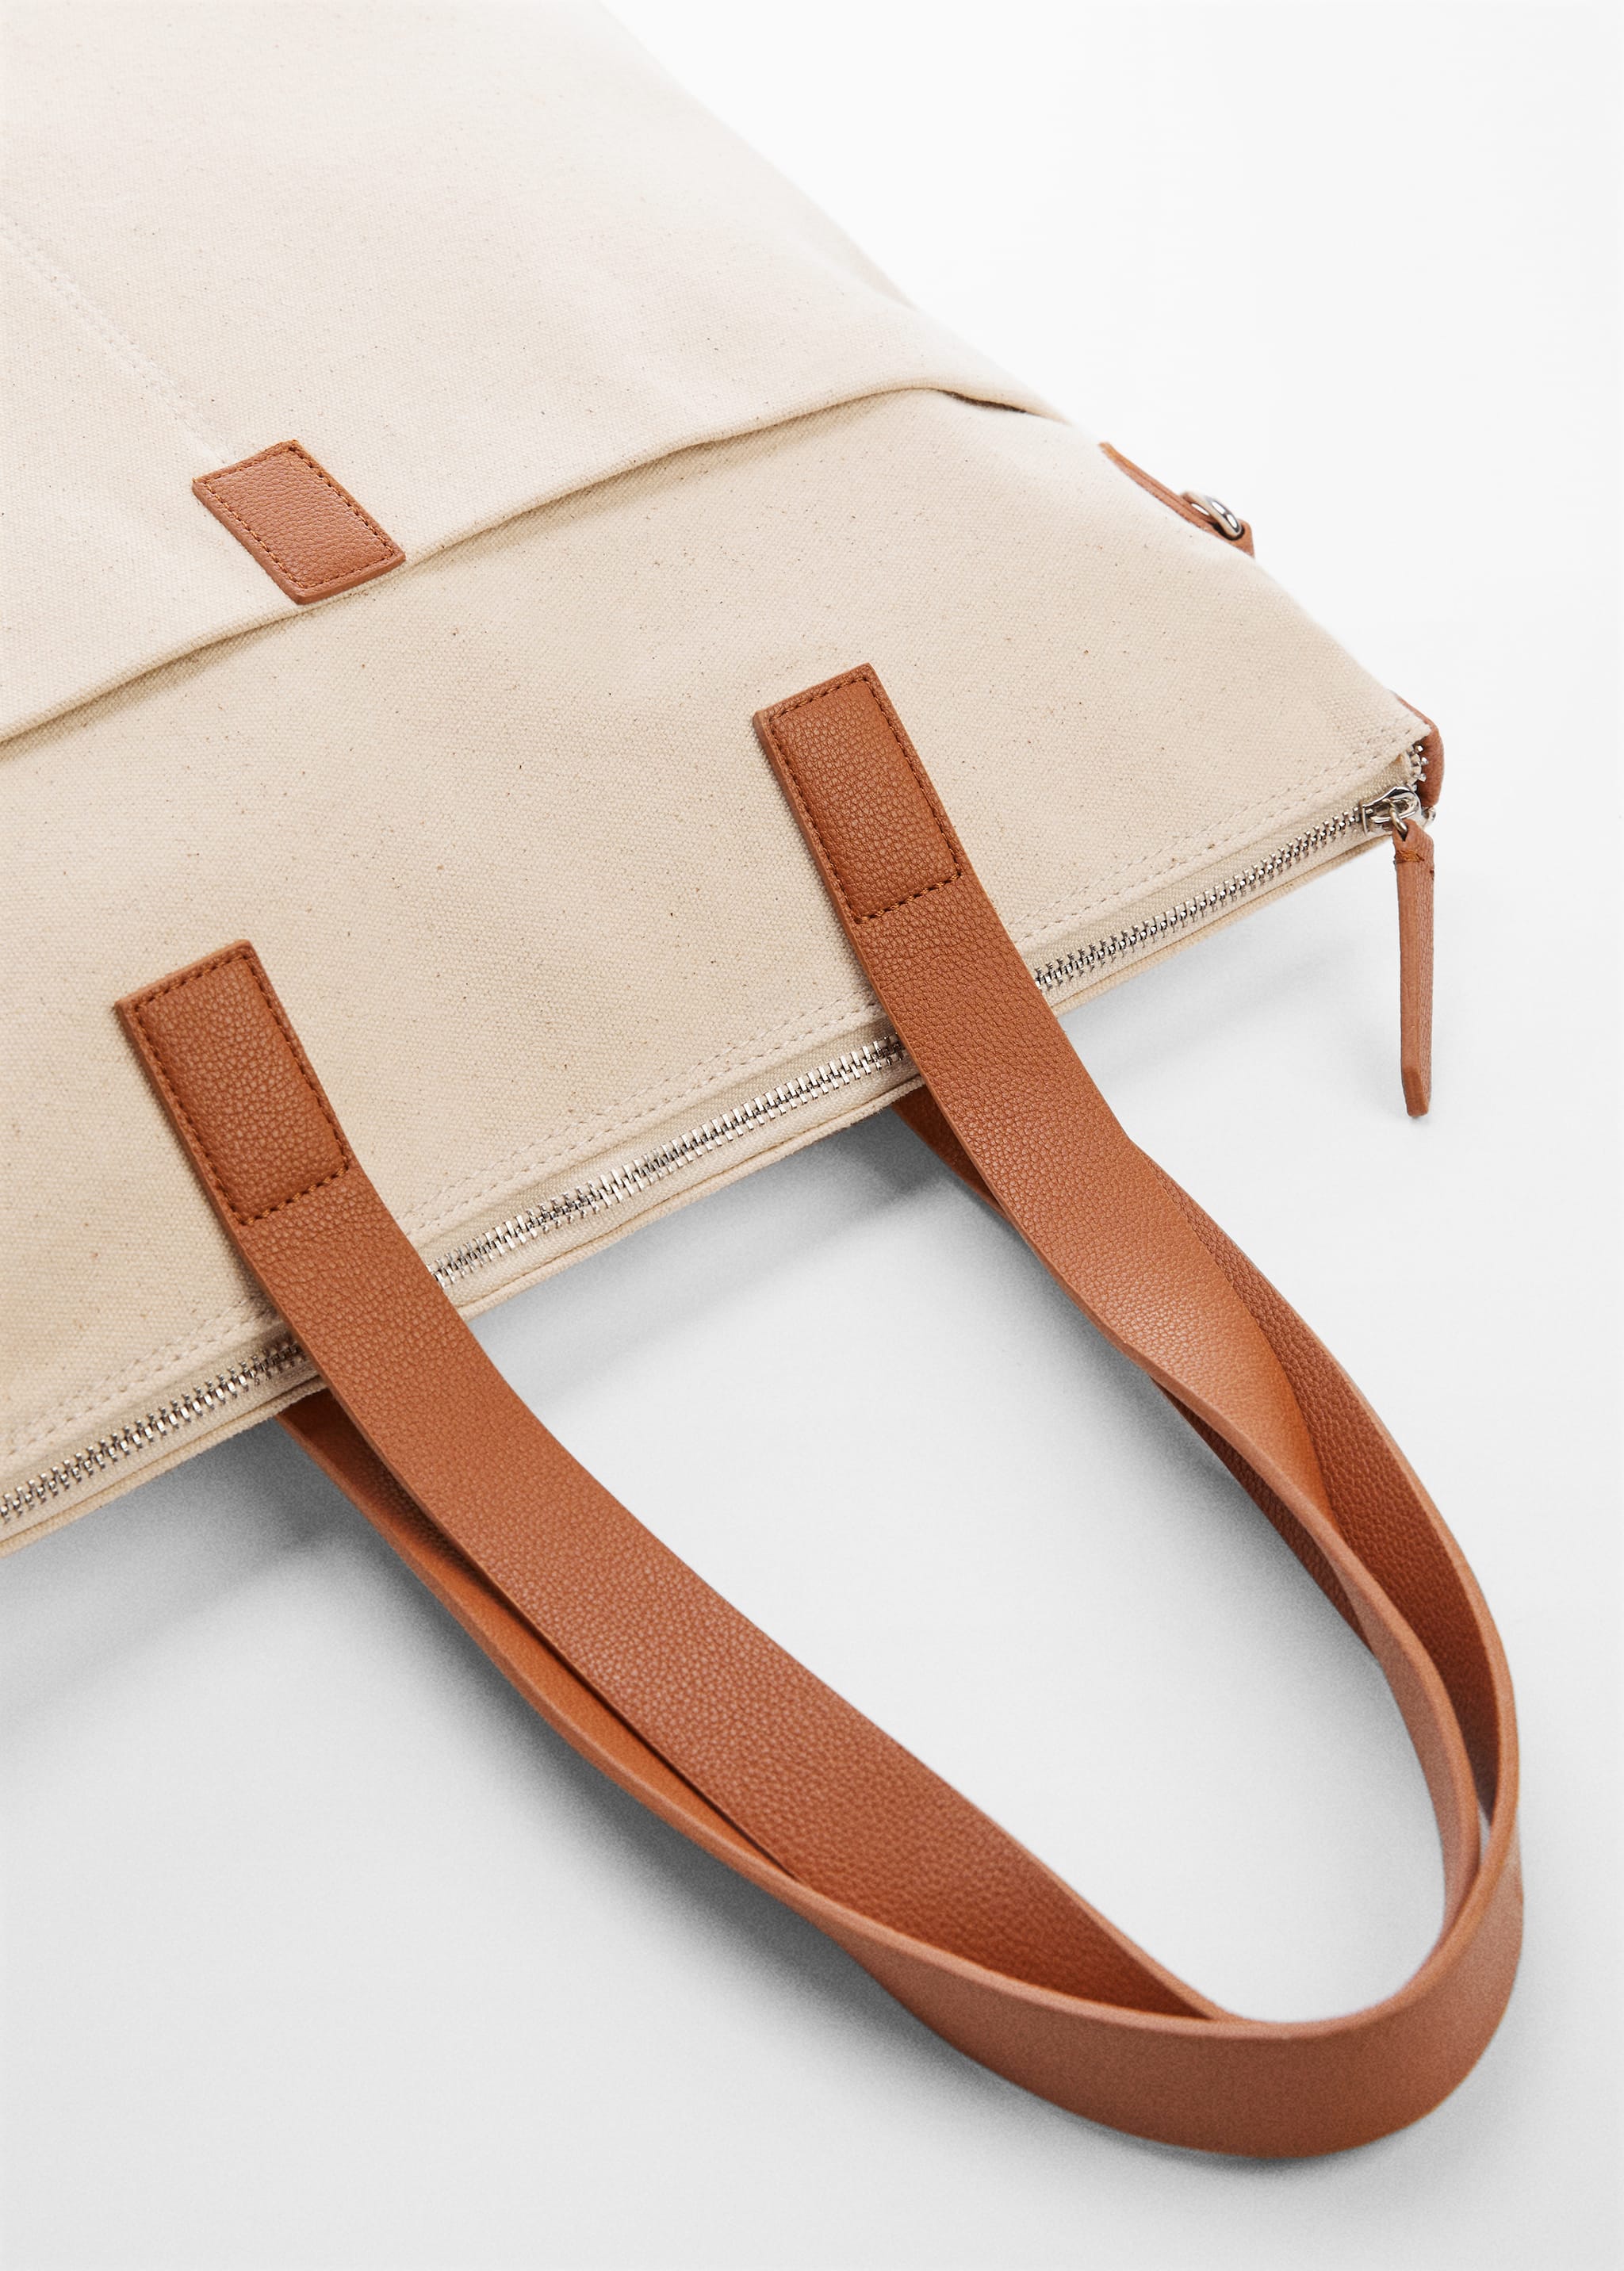 Cotton canvas tote bag - Details of the article 1